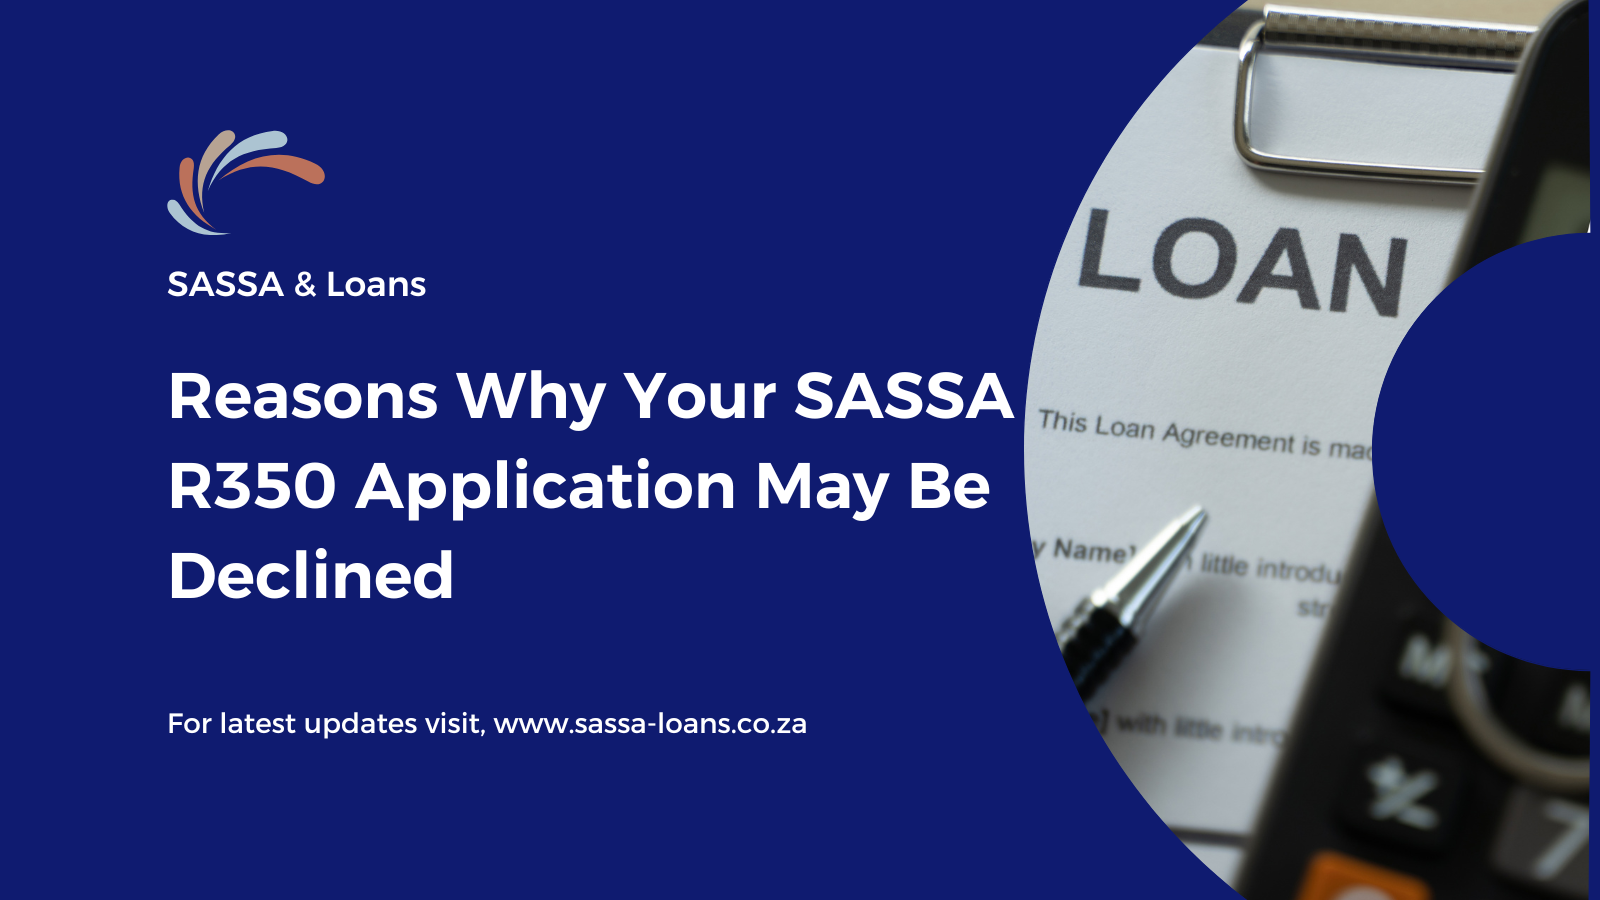 Reasons Why Your SASSA R350 Application May Be Declined